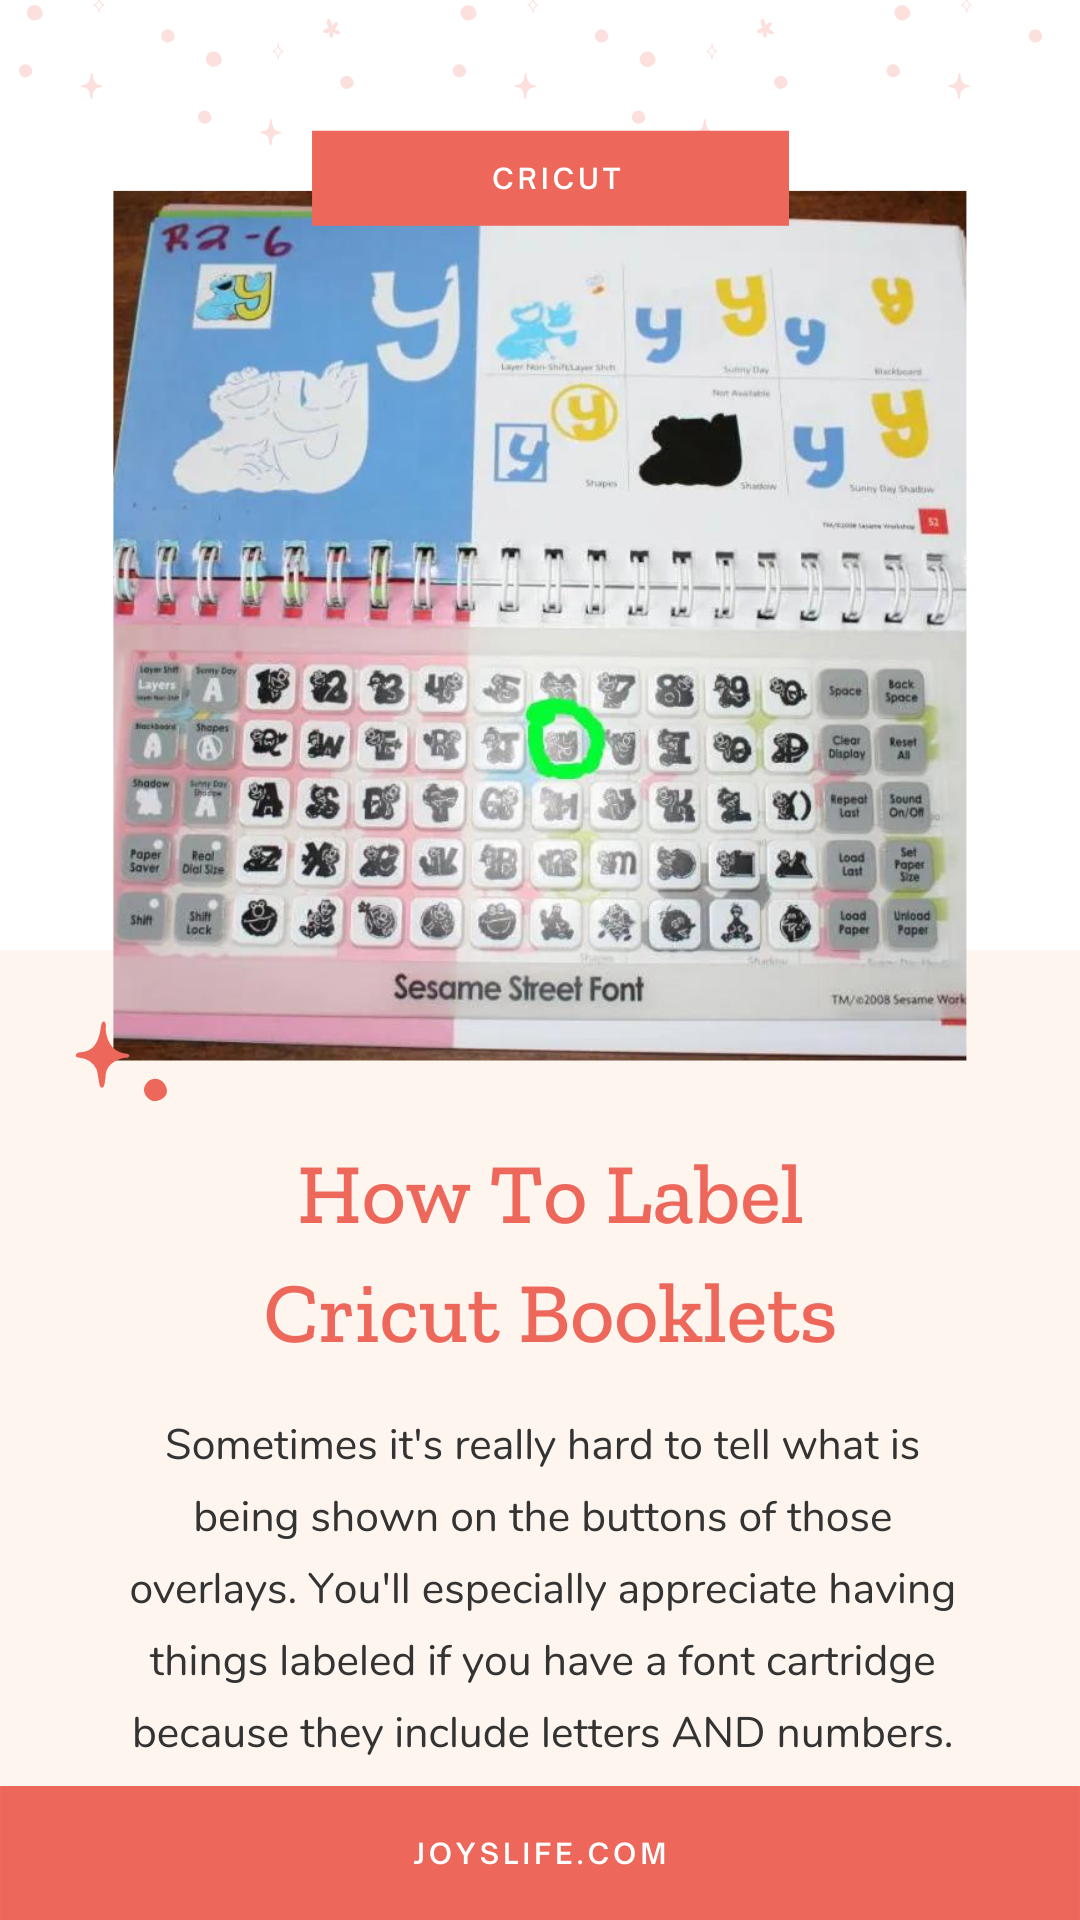 How To Label Cricut Booklets